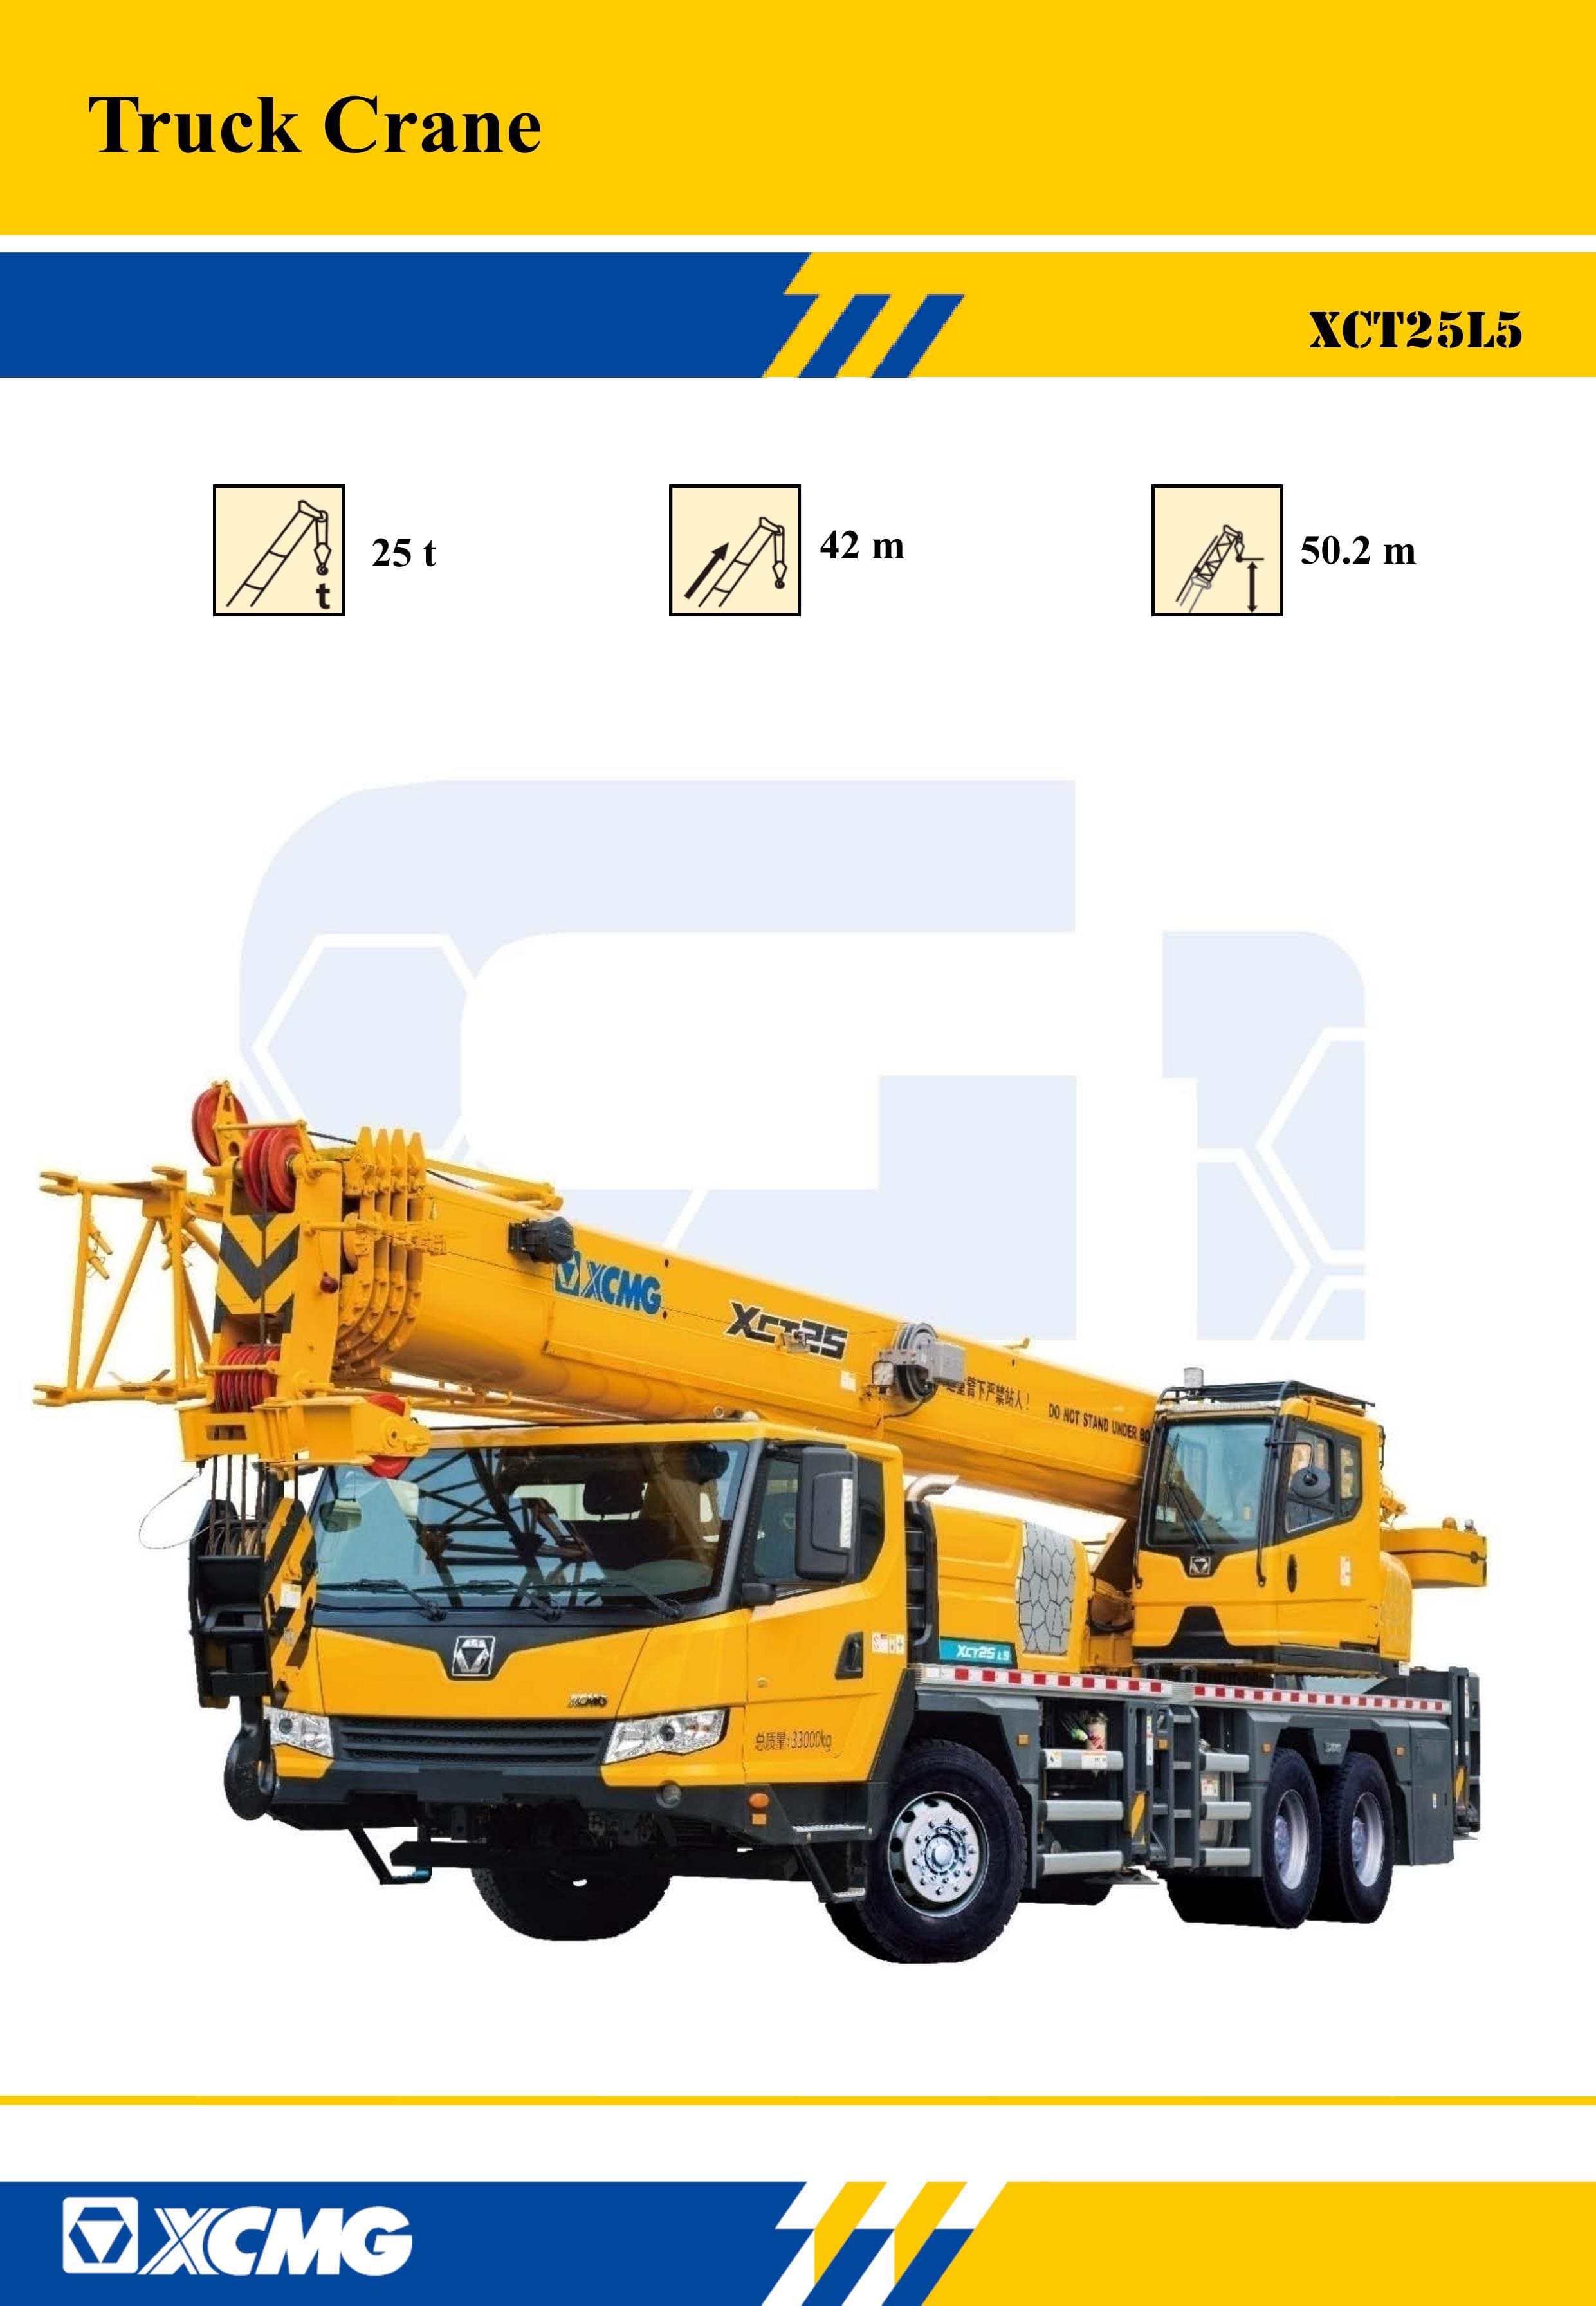 XCMG Official XCT25L5 Truck Crane for sale